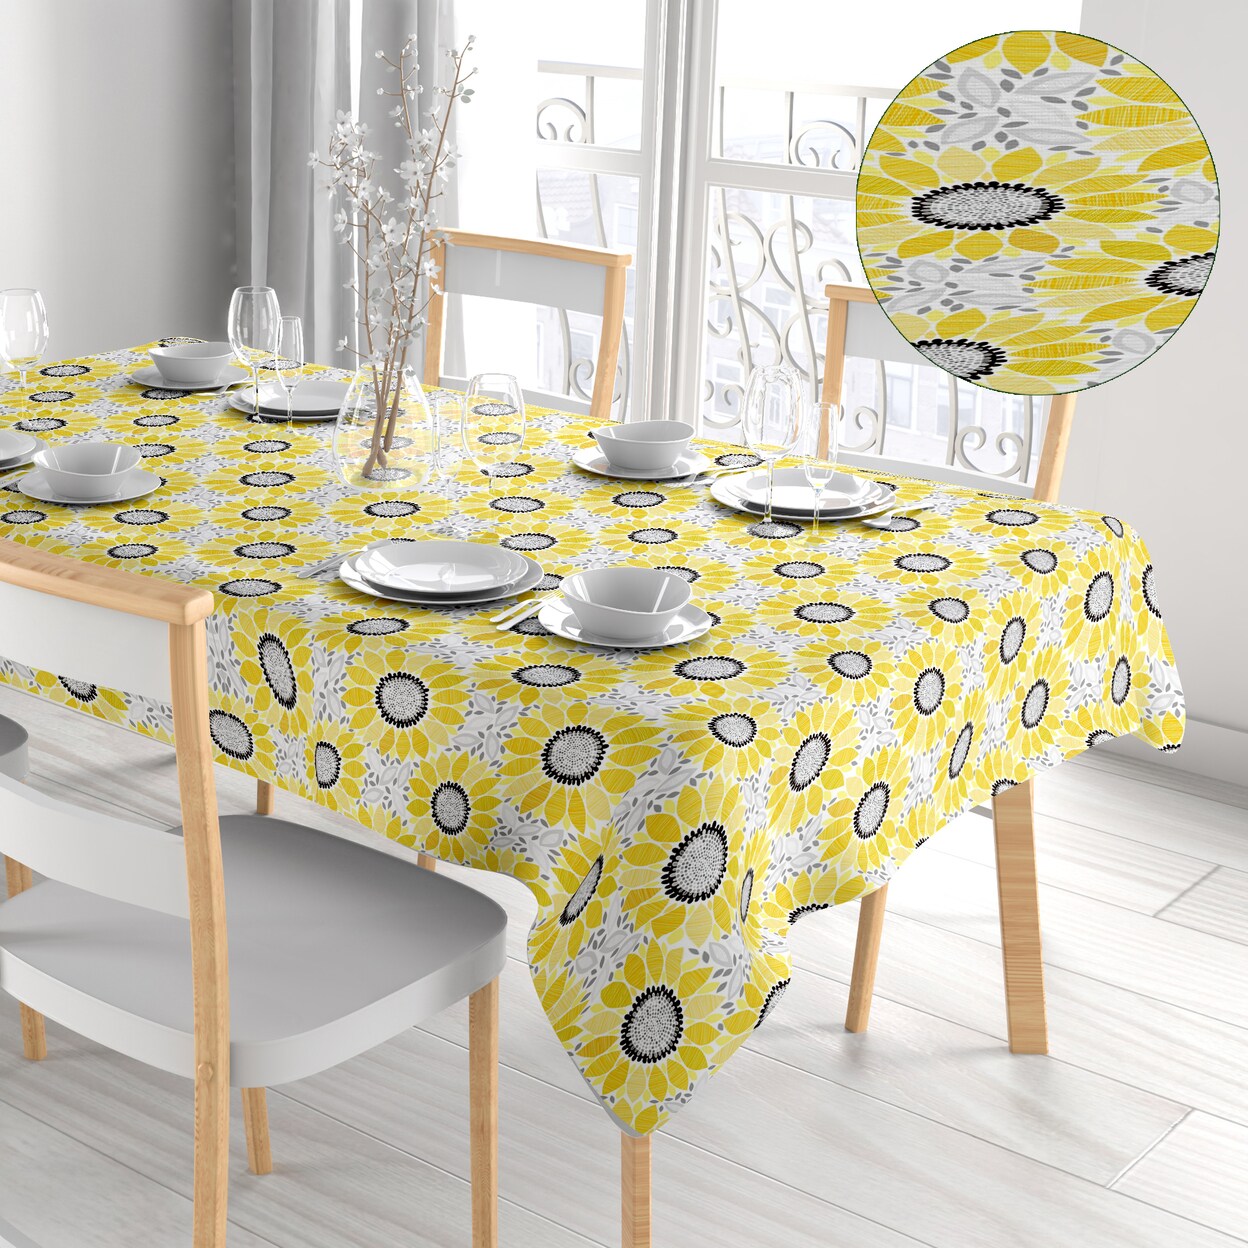 Bargain Hunters 2-Pack: Kitchen Dining Water-Resistant Oil Proof Flannel Back PVC Vinyl Tablecloth